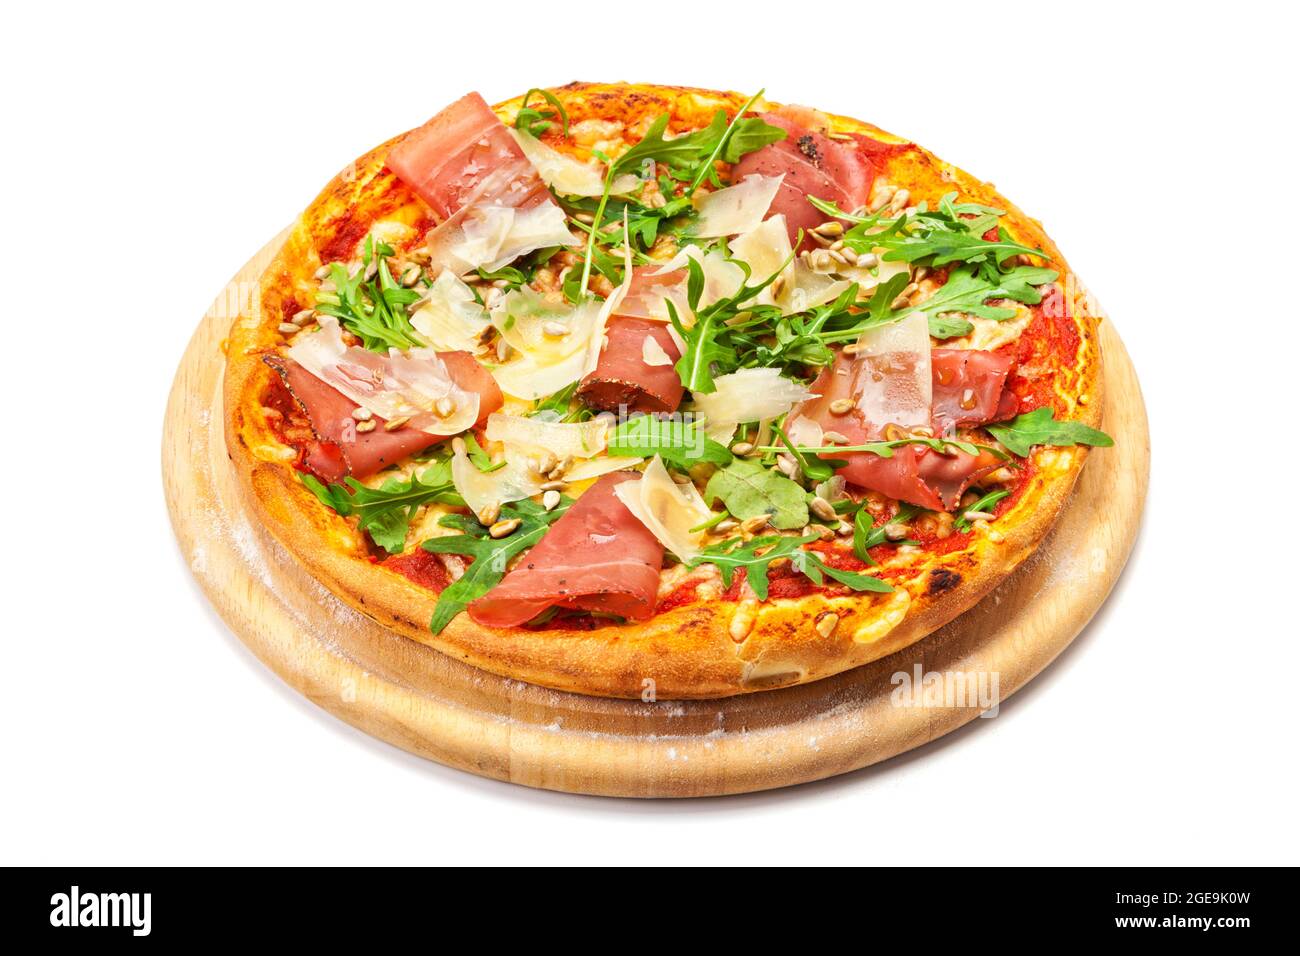 Pizza with dry cured ham, parmesan cheese, rocket leaves and ipne nuts on wooden platter, isolated on white background with clipping path Stock Photo